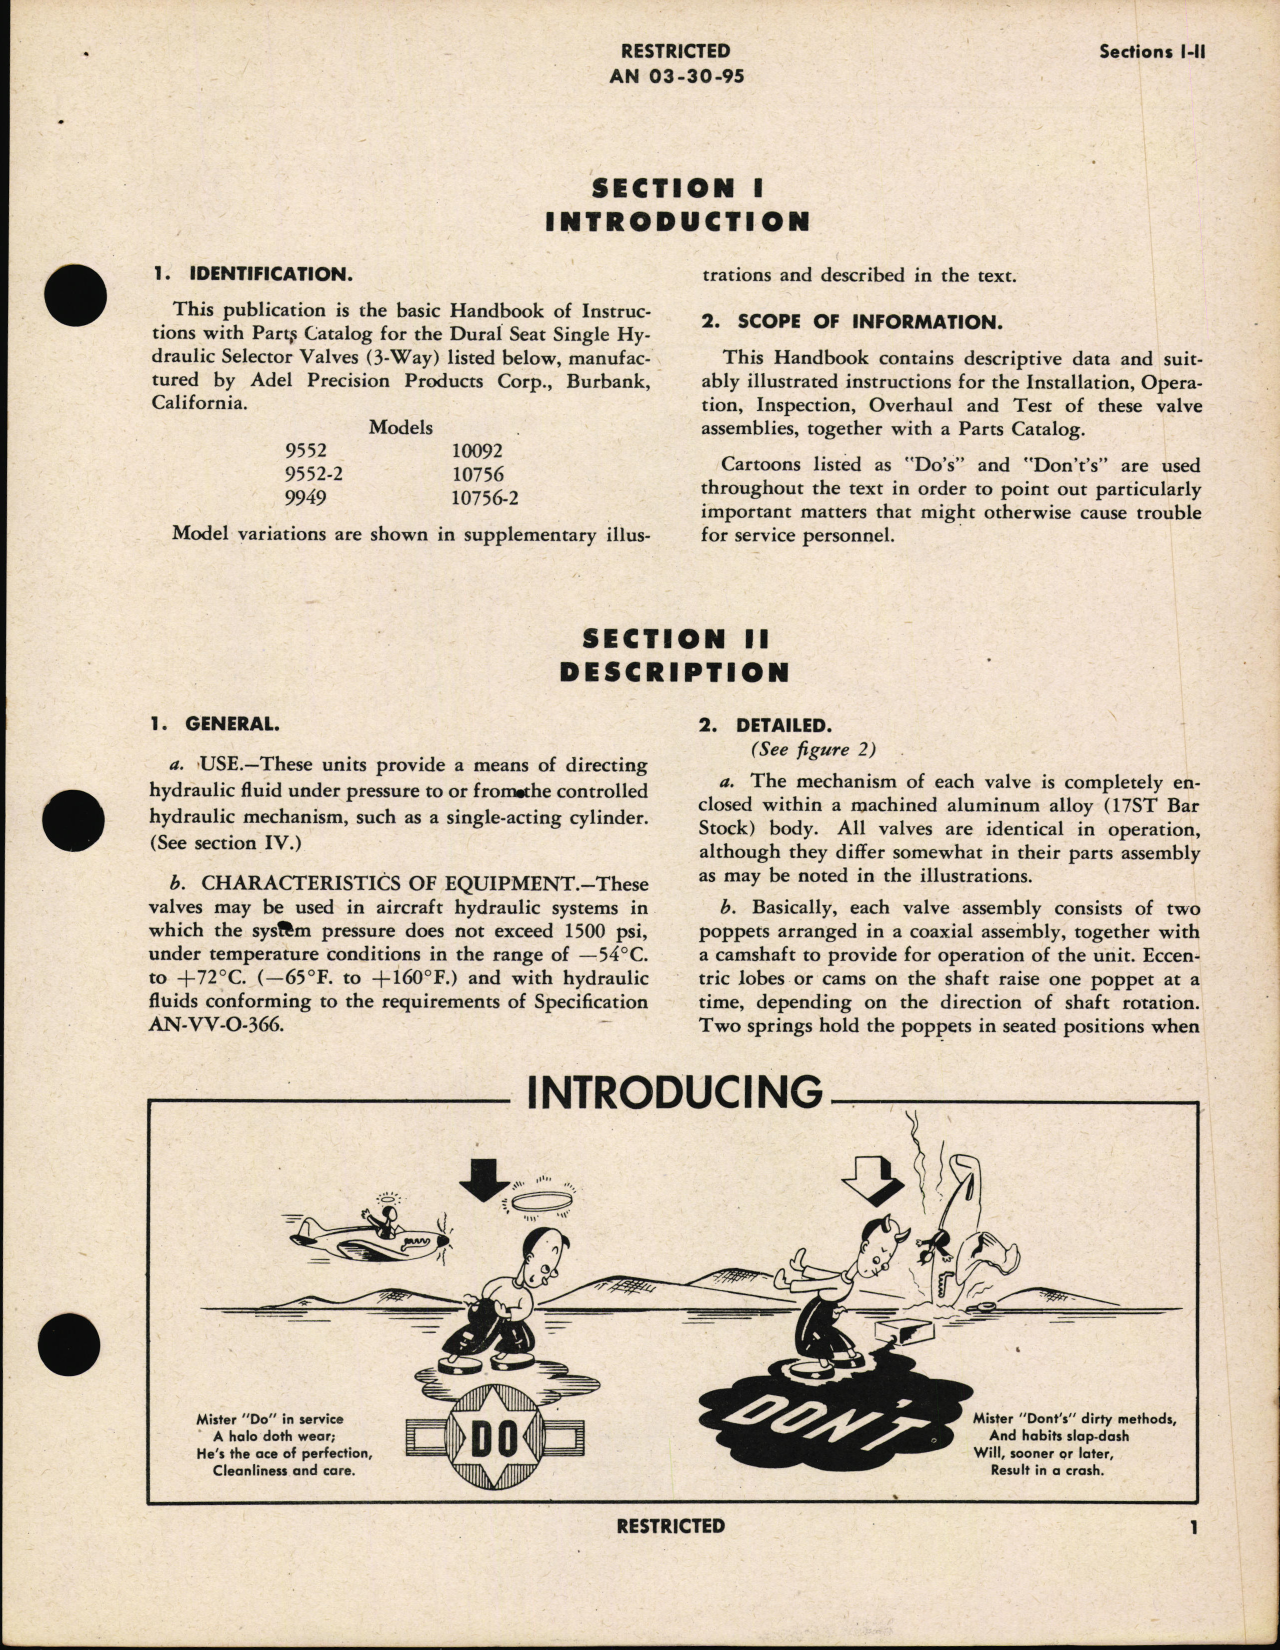 Sample page 5 from AirCorps Library document: Handbook of Instructions with Parts Catalog for Dural Seat Singly Hydraulic Selector Valves (3 Way)